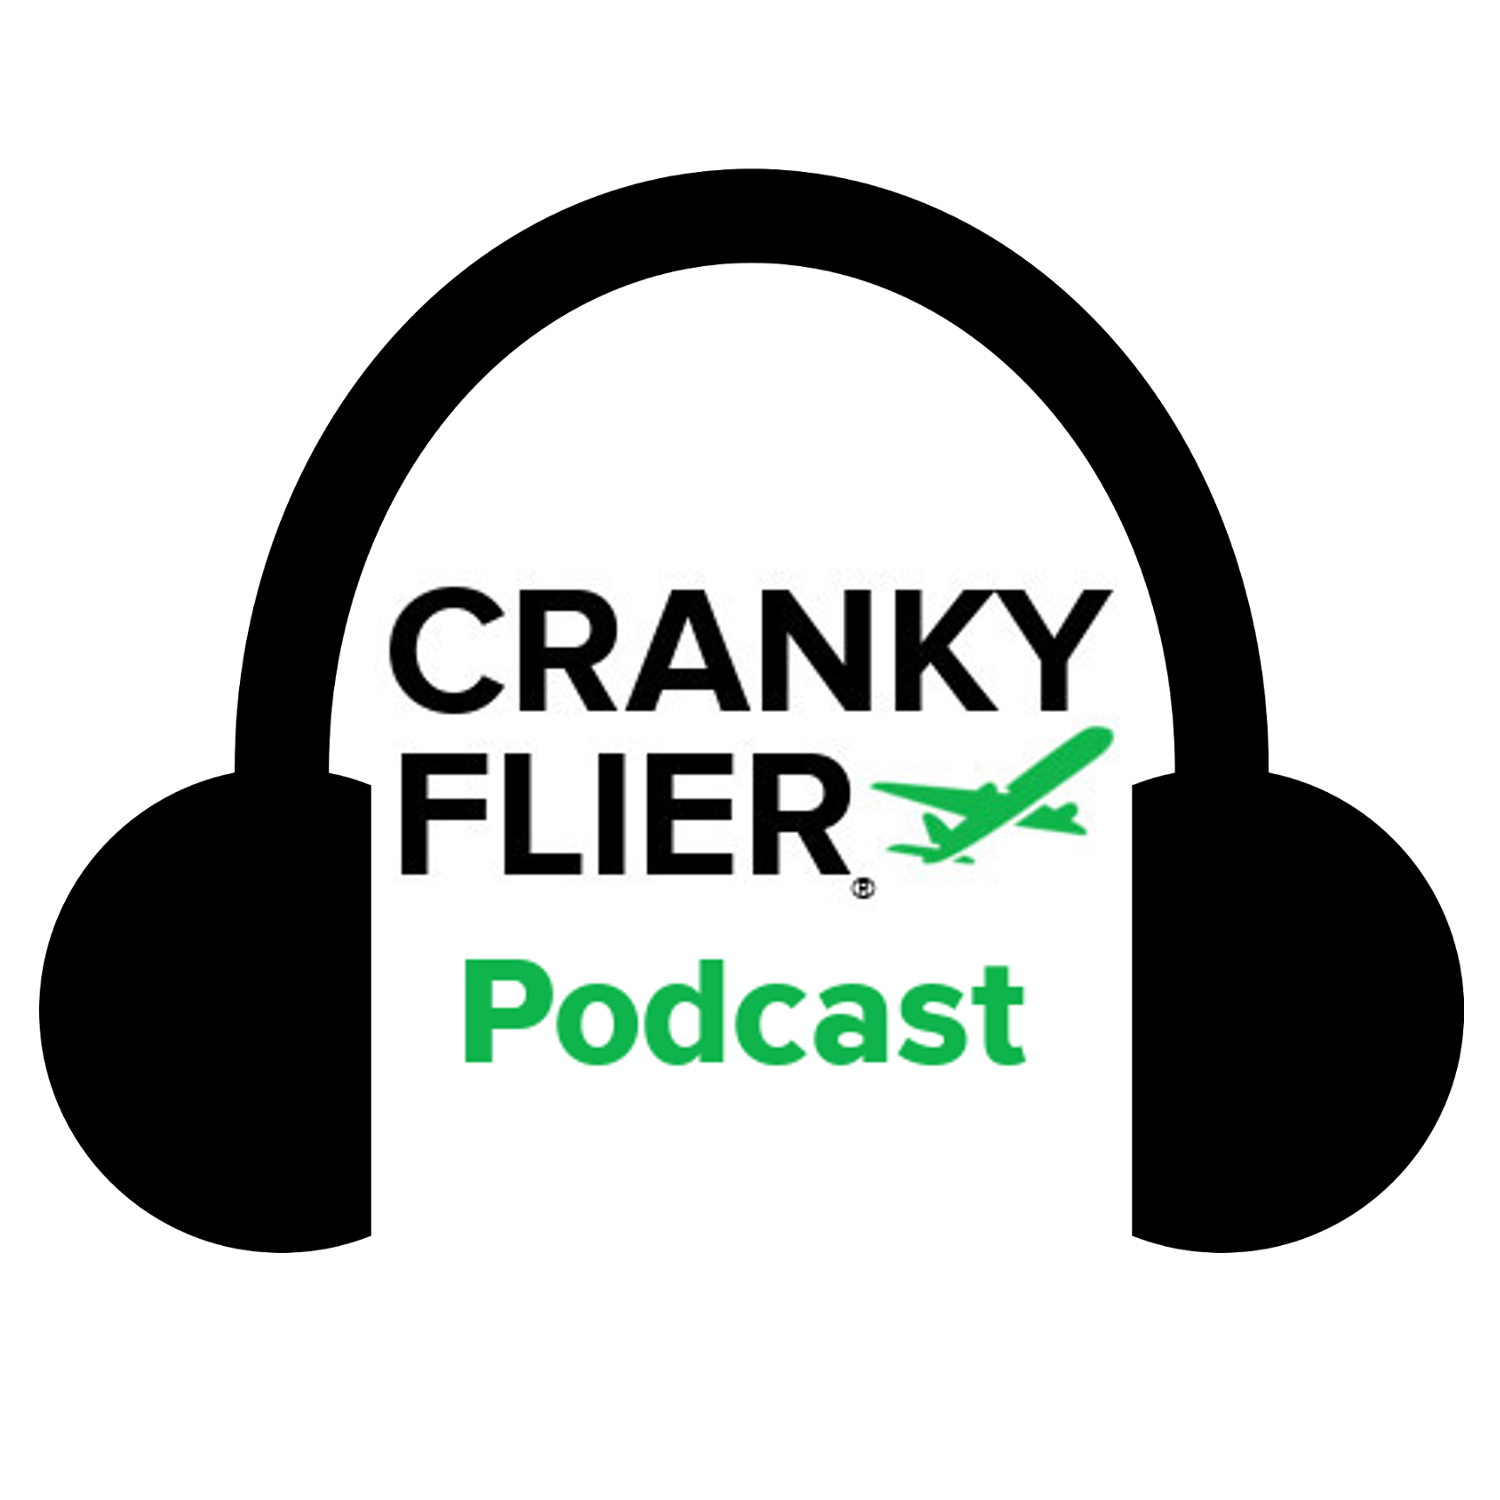 Cranky Flier Podcast #3: Why the Concert Ticket Model Won't Work for Most Airlines